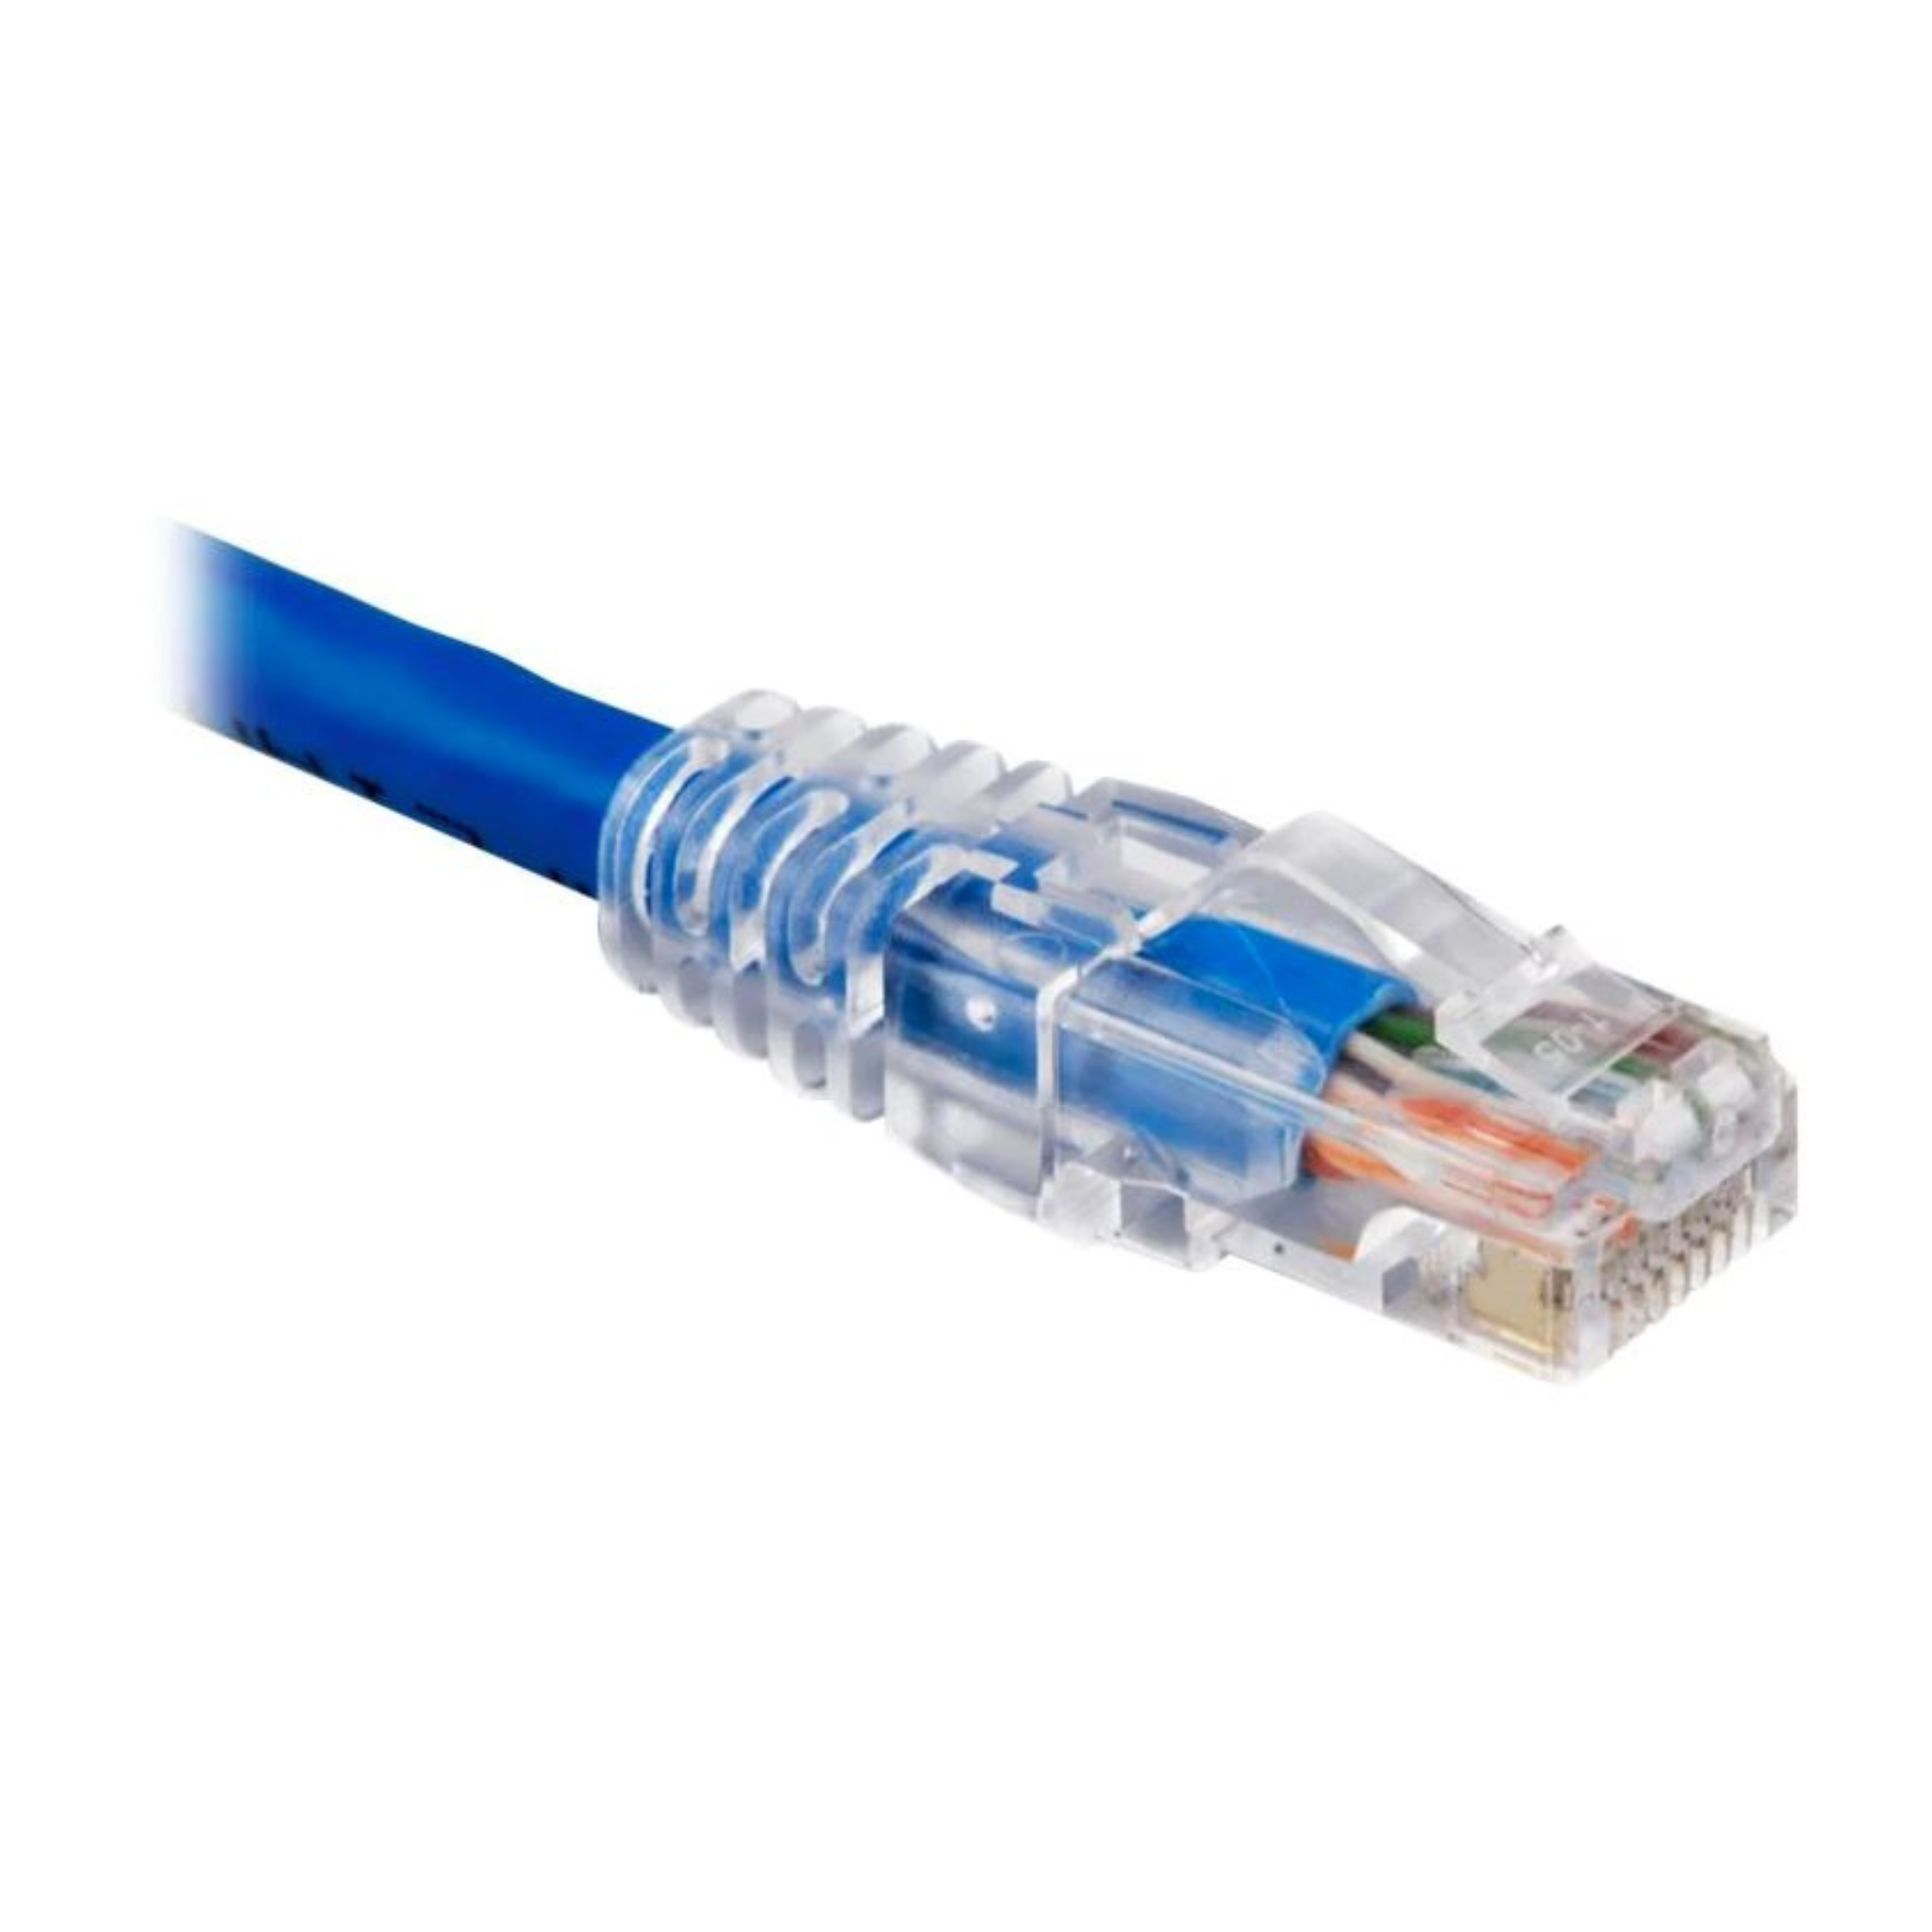 100 PACK OF CAT6 PACH CABLES - BLUE